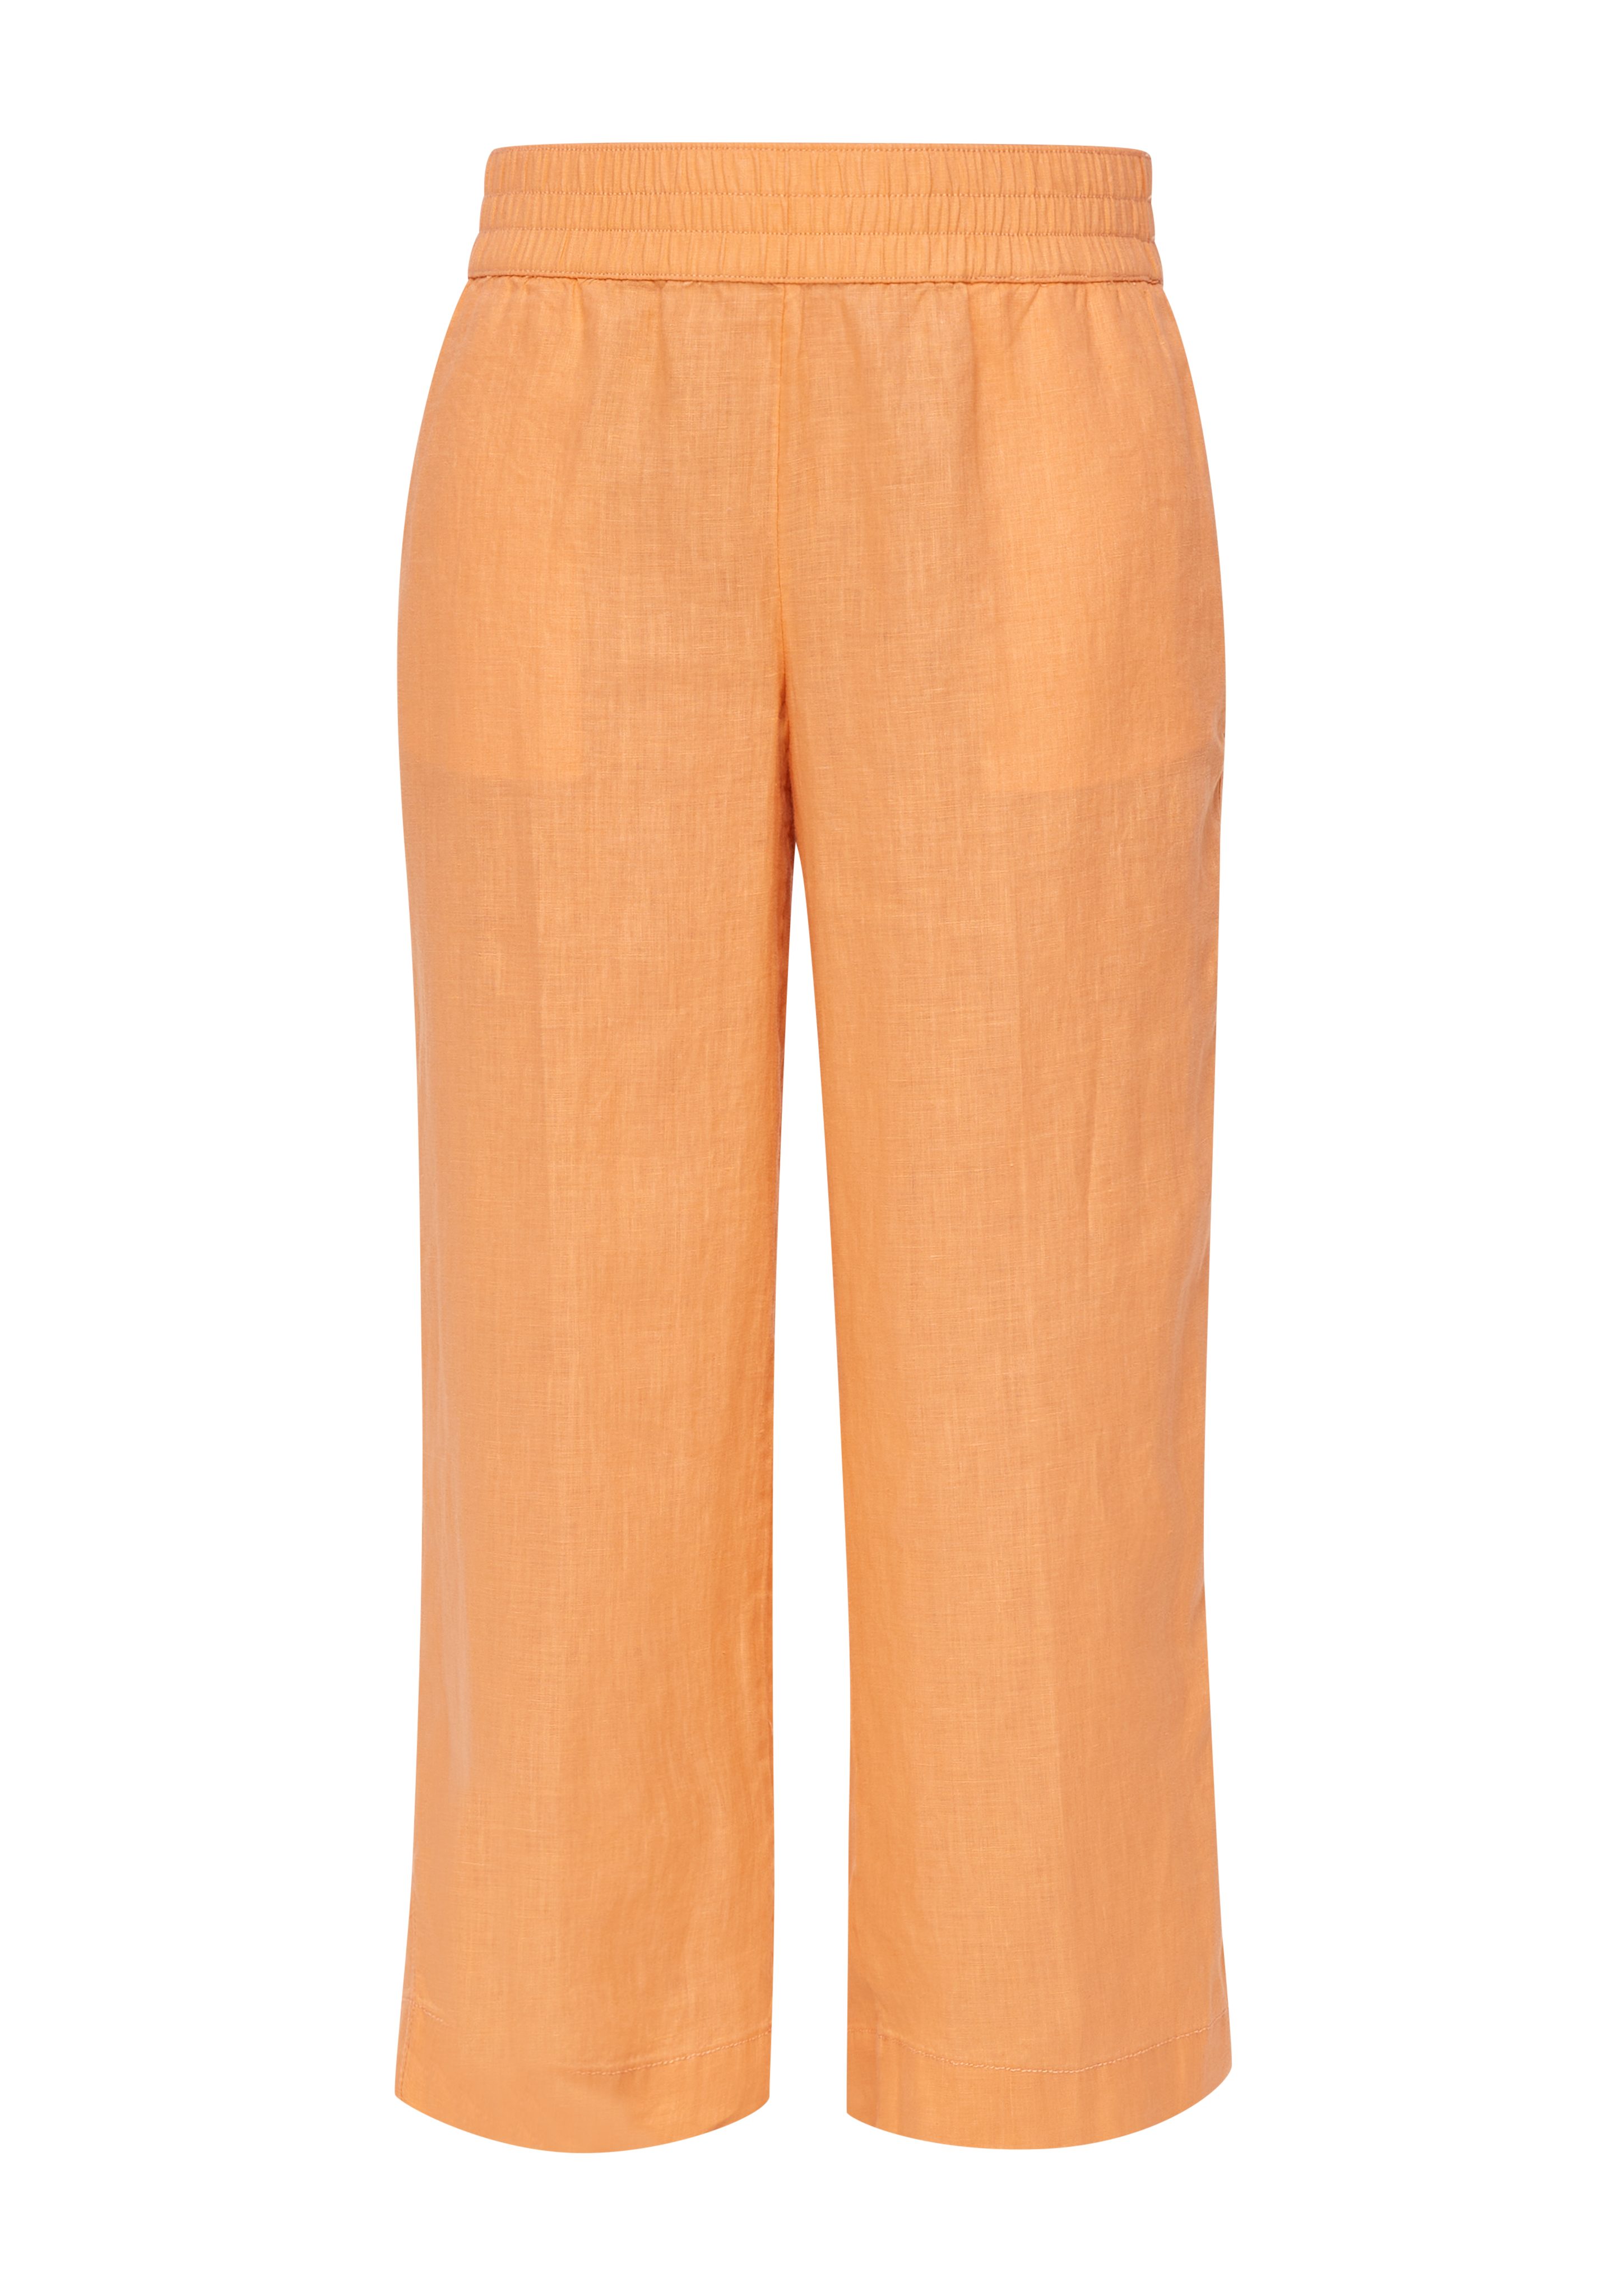 Relaxed: mit 3/4-Hose s.Oliver Allover-Print mango Hose